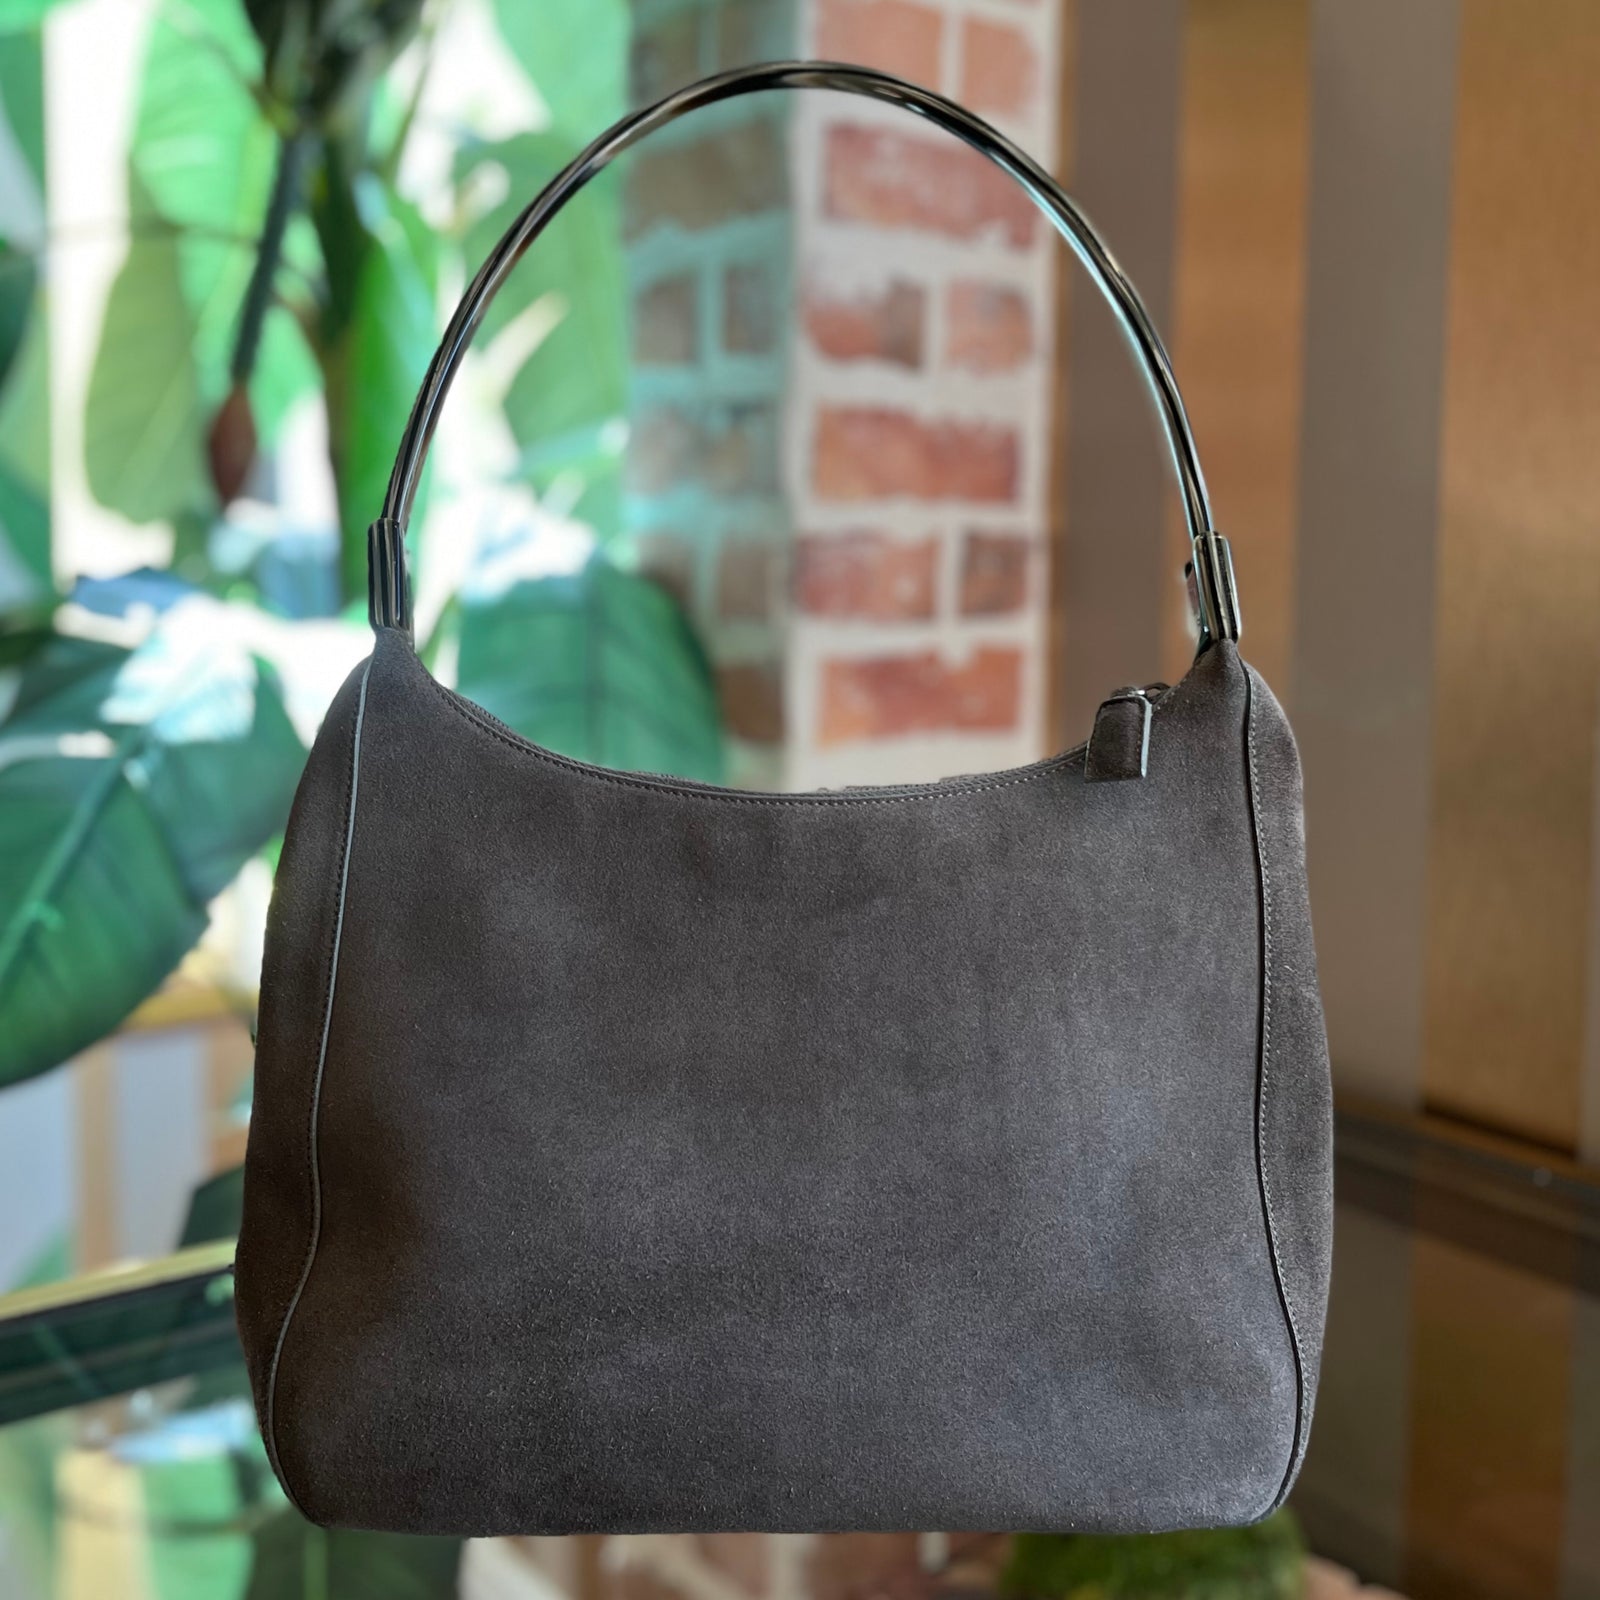 Authentic Prada Bags, Shoes, and Accessories - The Purse Ladies